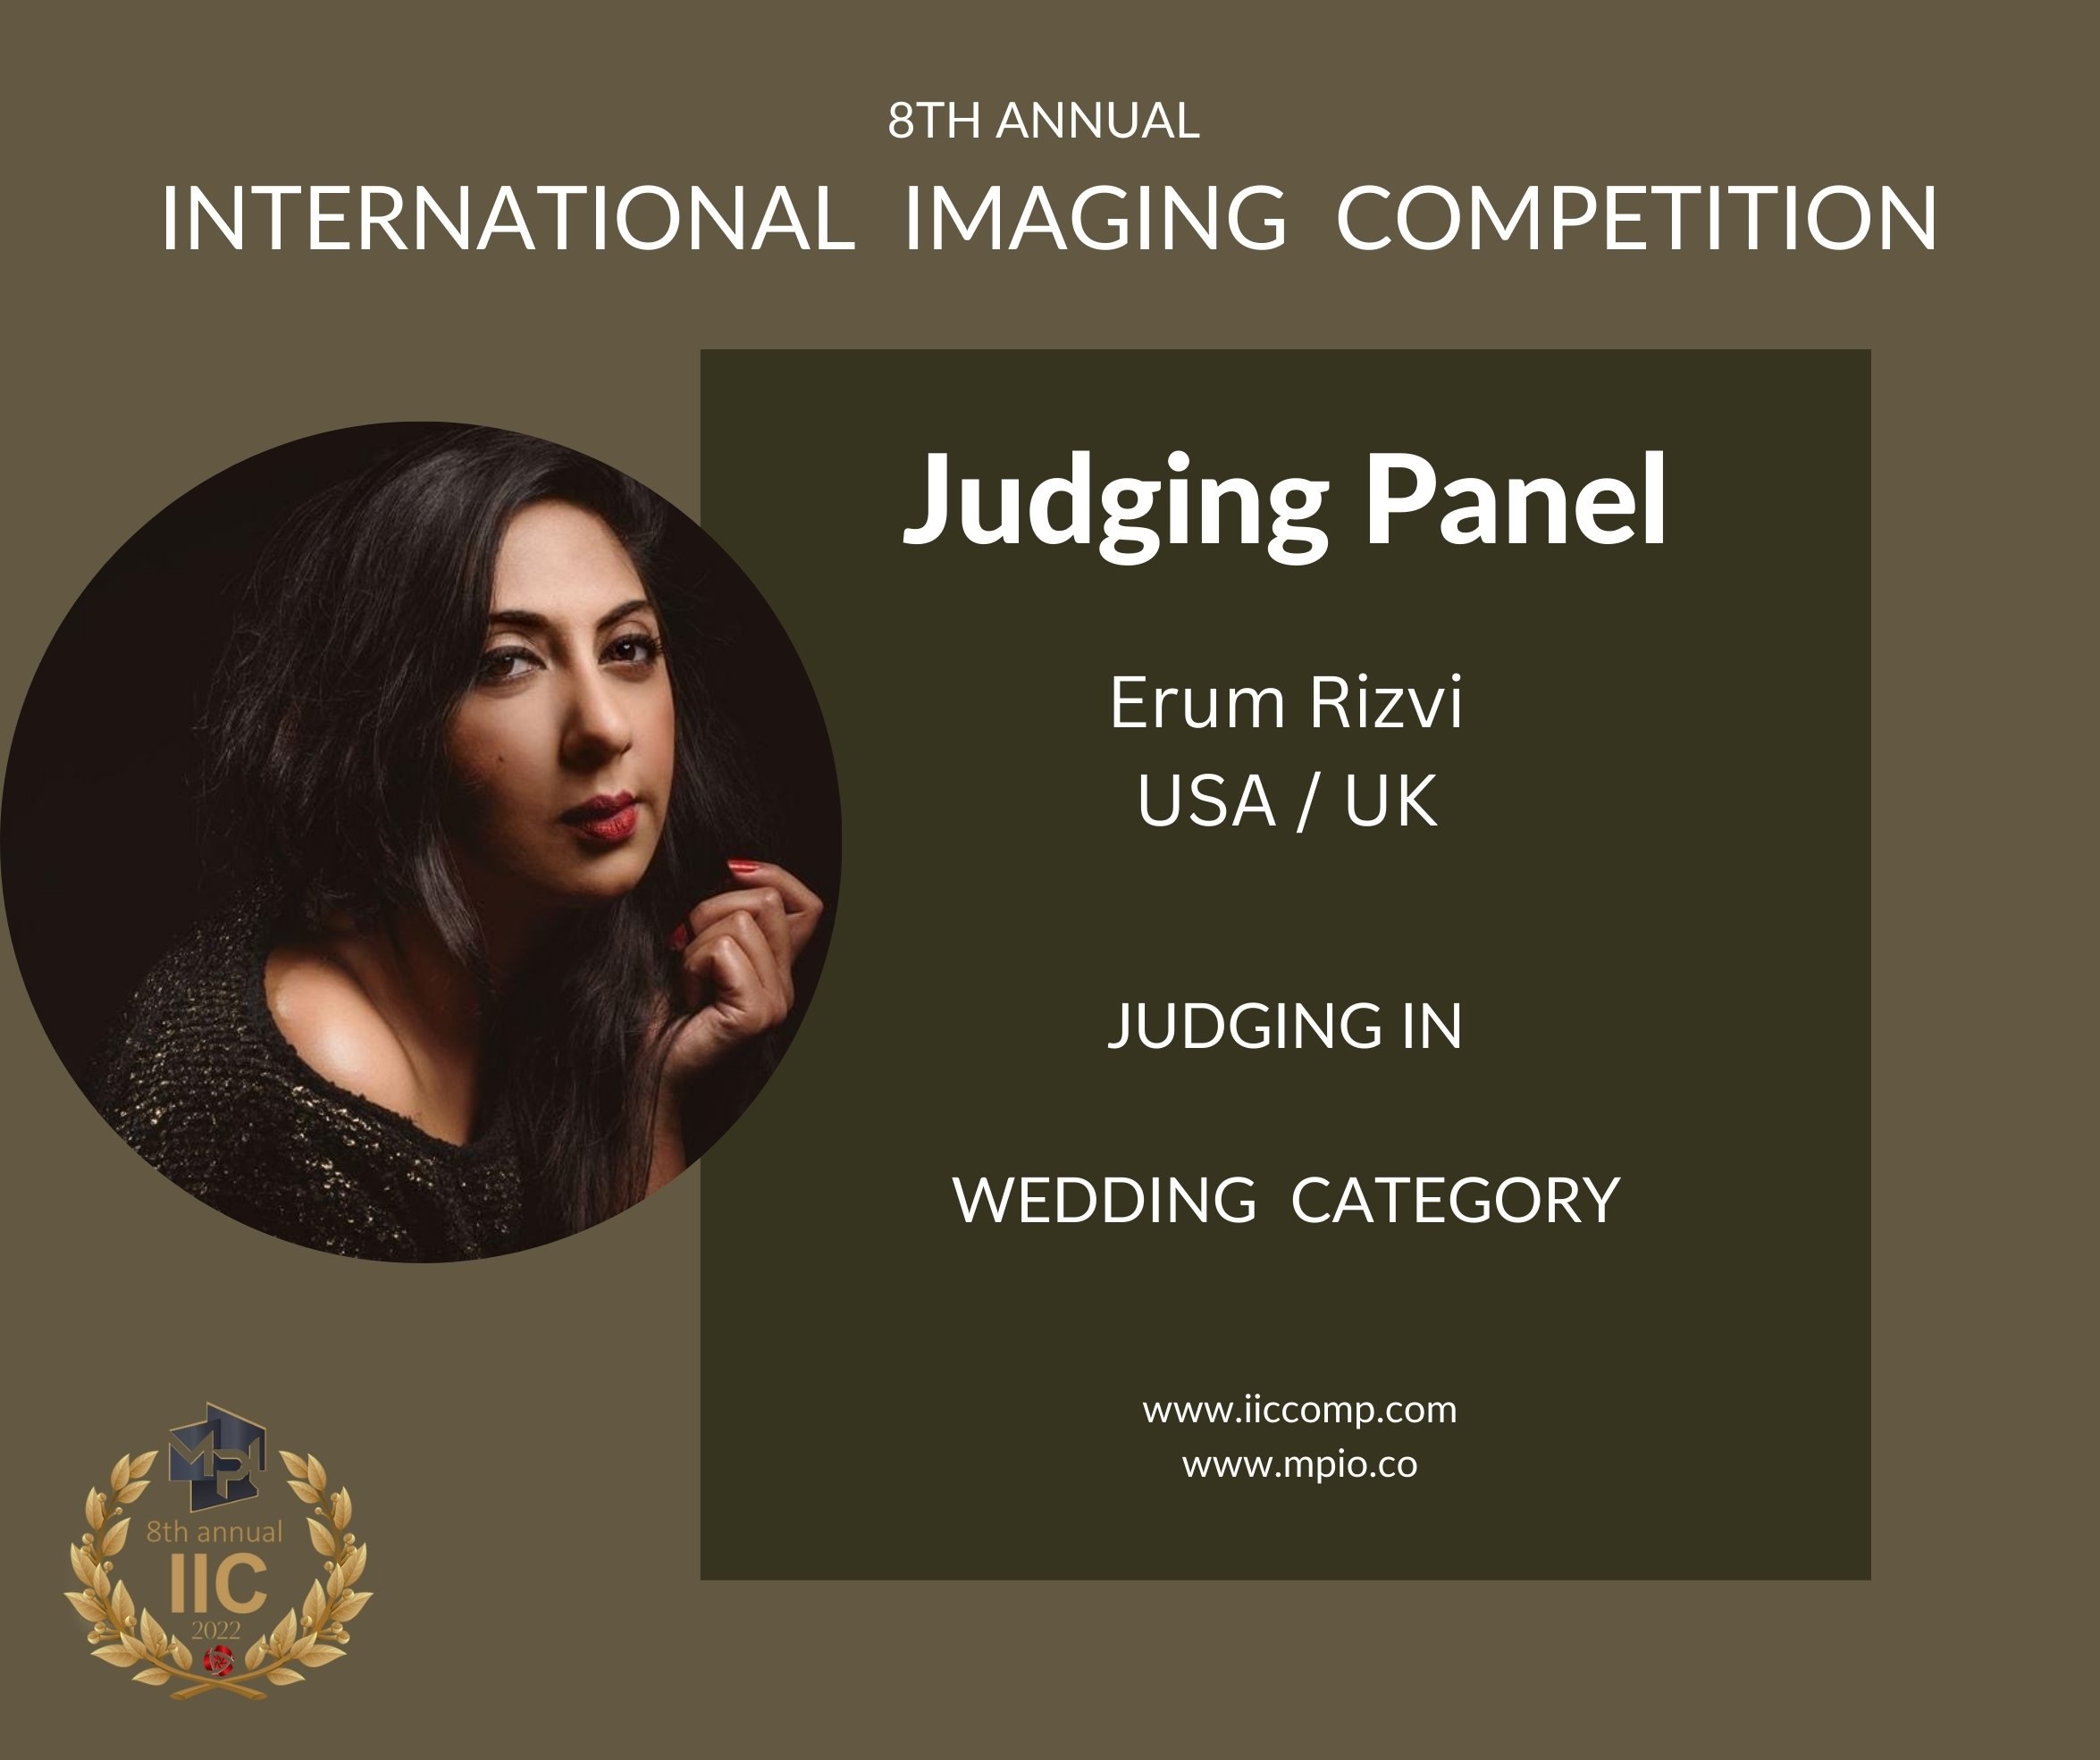 8th Annual International Imaging Competition